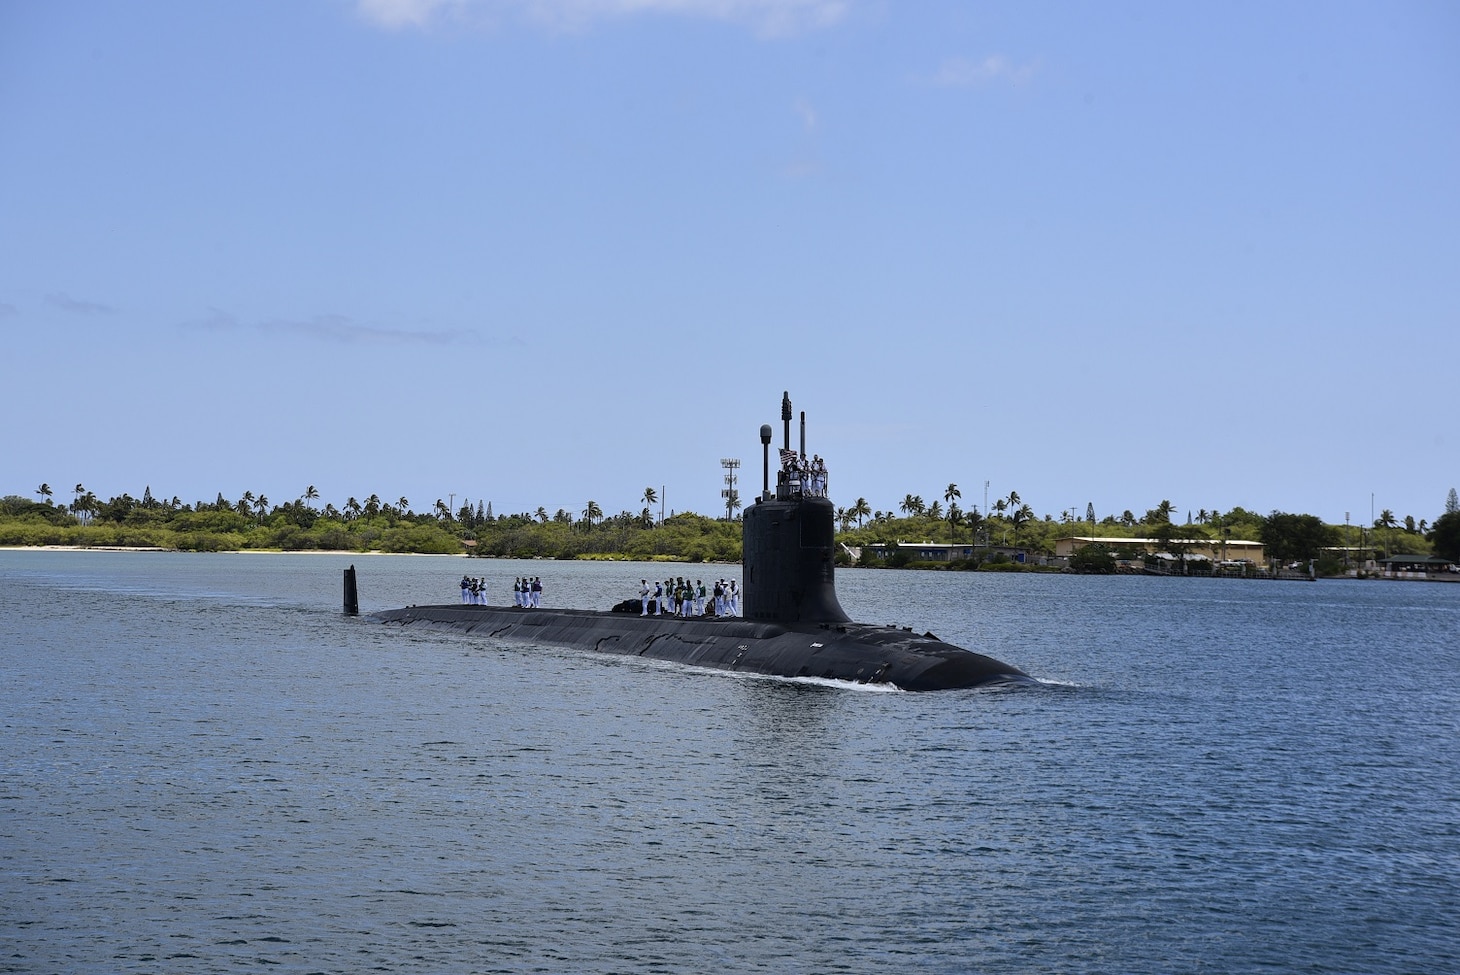 The Virginia-class fast-attack submarine USS Illinois (SSN 786) returns to Joint Base Pearl Harbor-Hickam following a scheduled deployment in the U.S. 7th Fleet area of operations. Illinois performed a full spectrum of operations, including anti-submarine and anti-surface warfare, during the Indo-Pacific deployment.